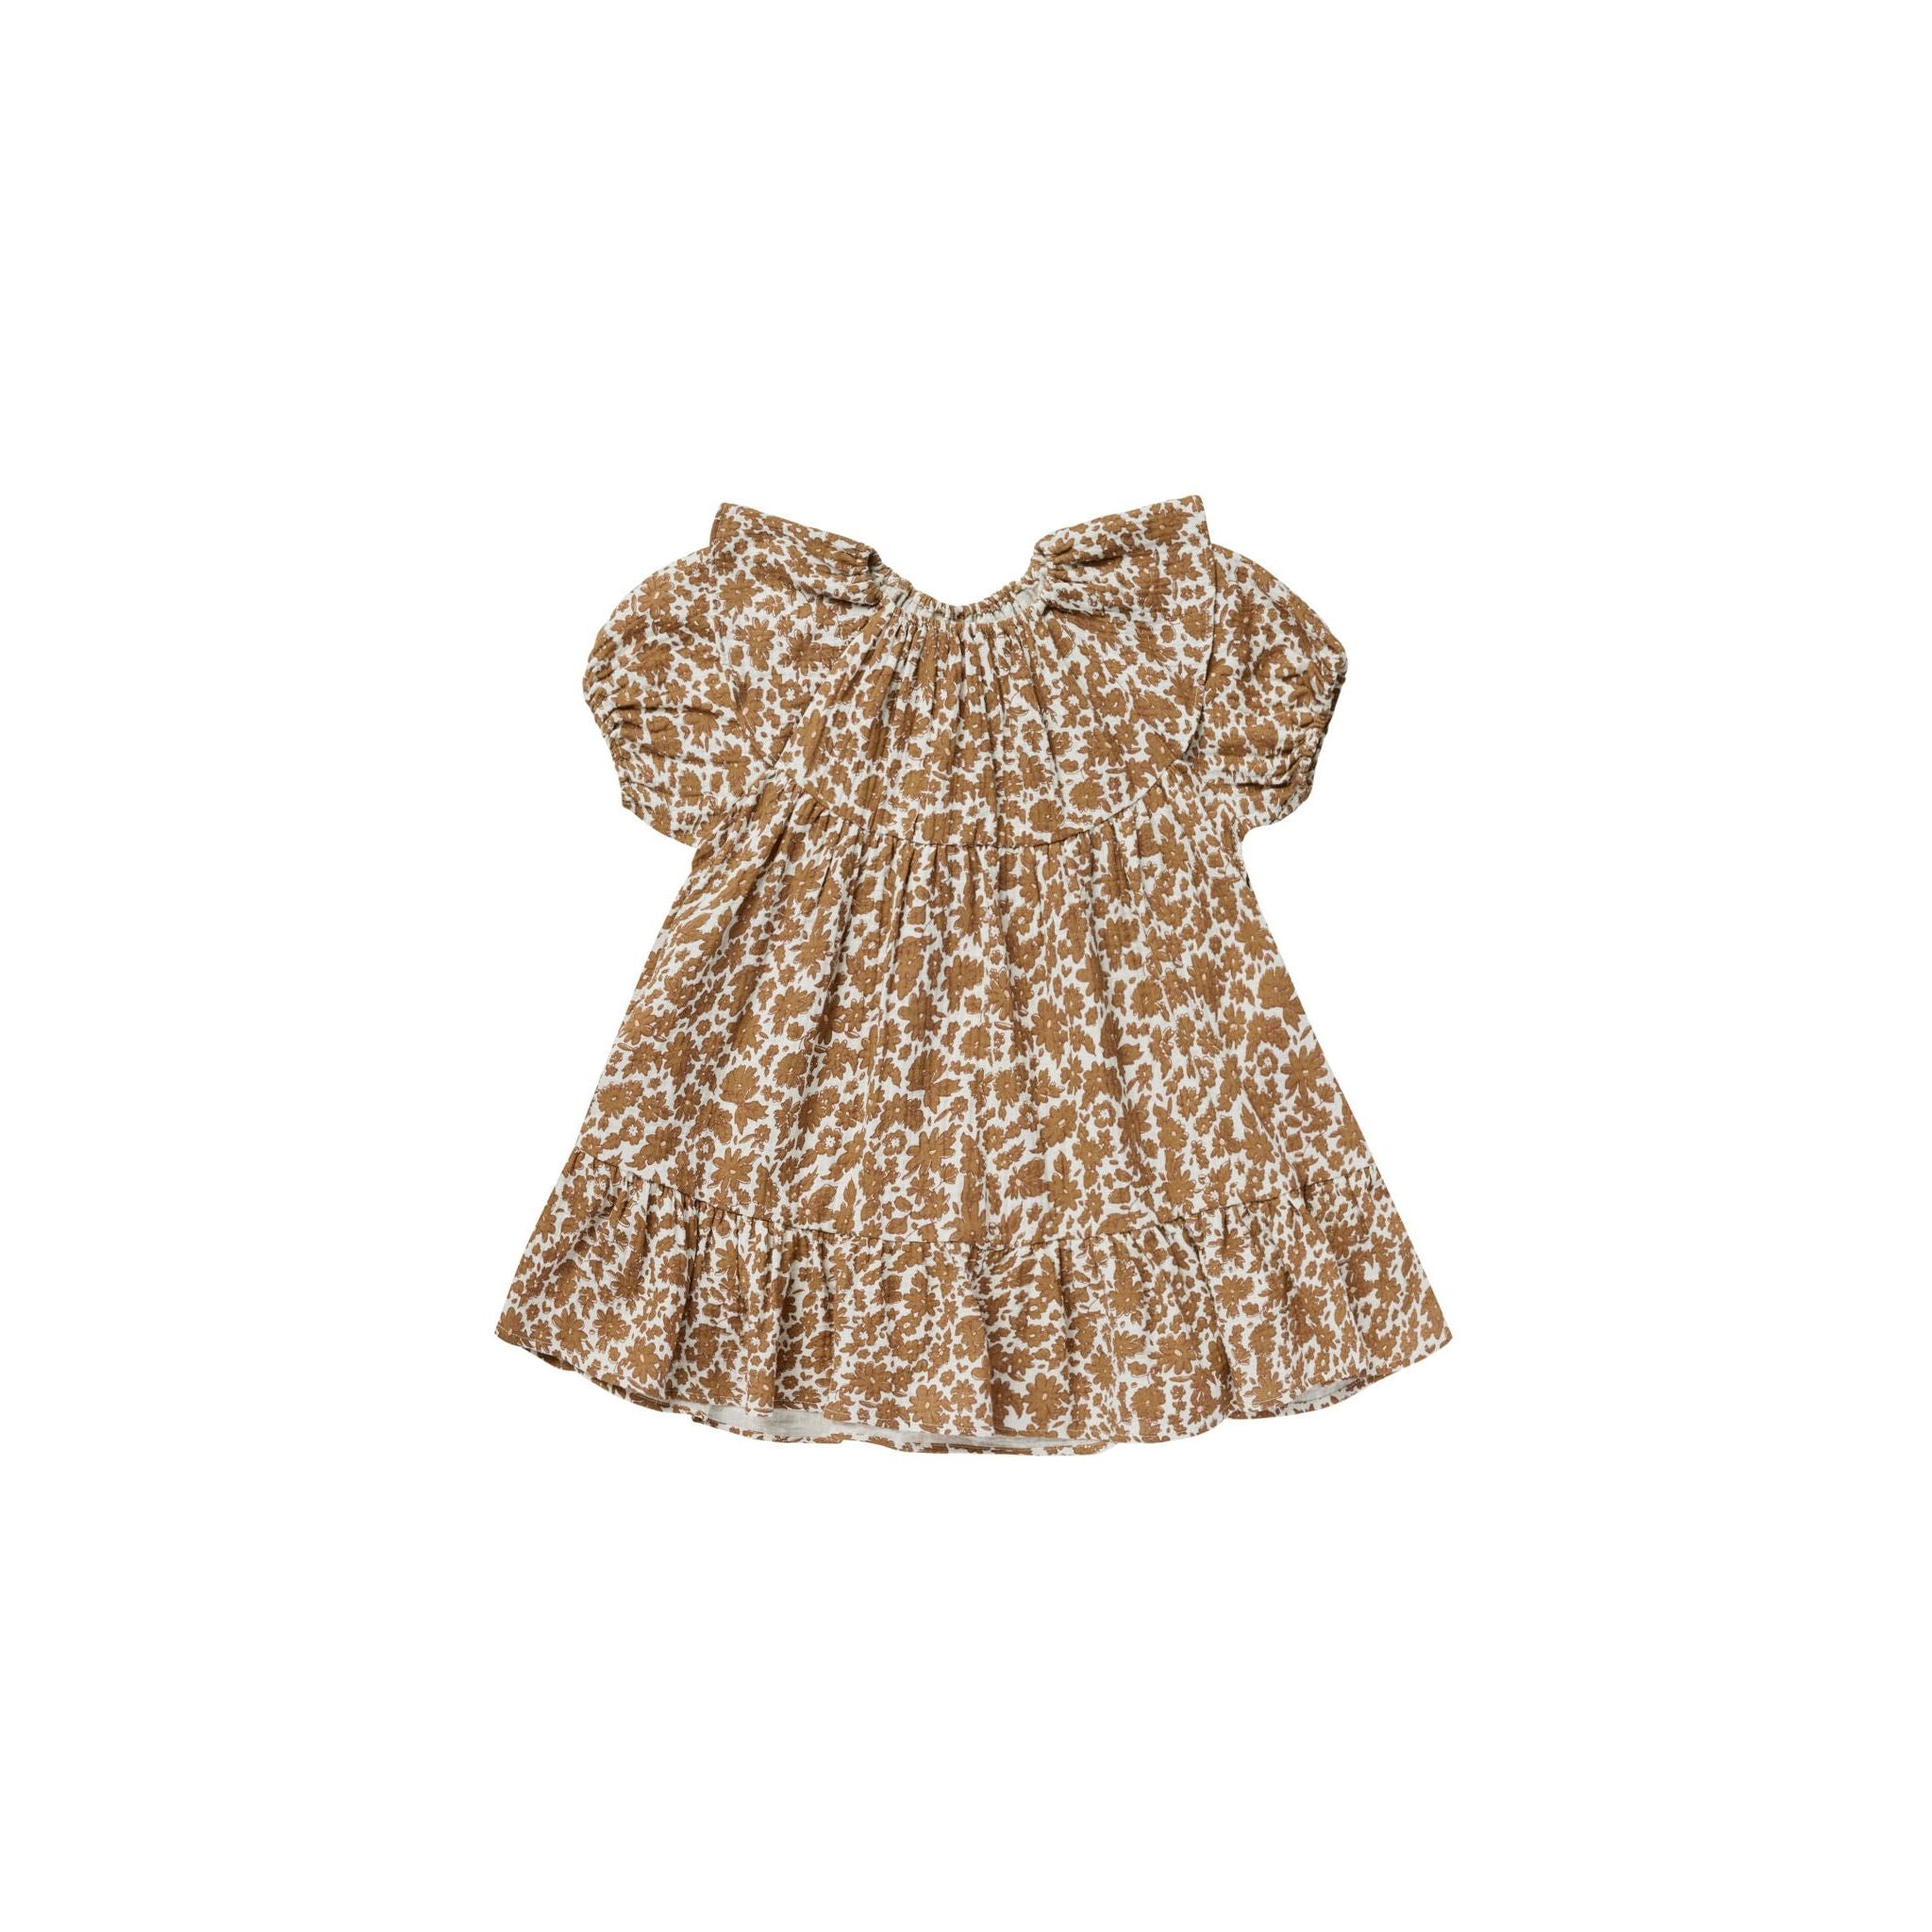 short sleeve ruffled dress with gold floral print.